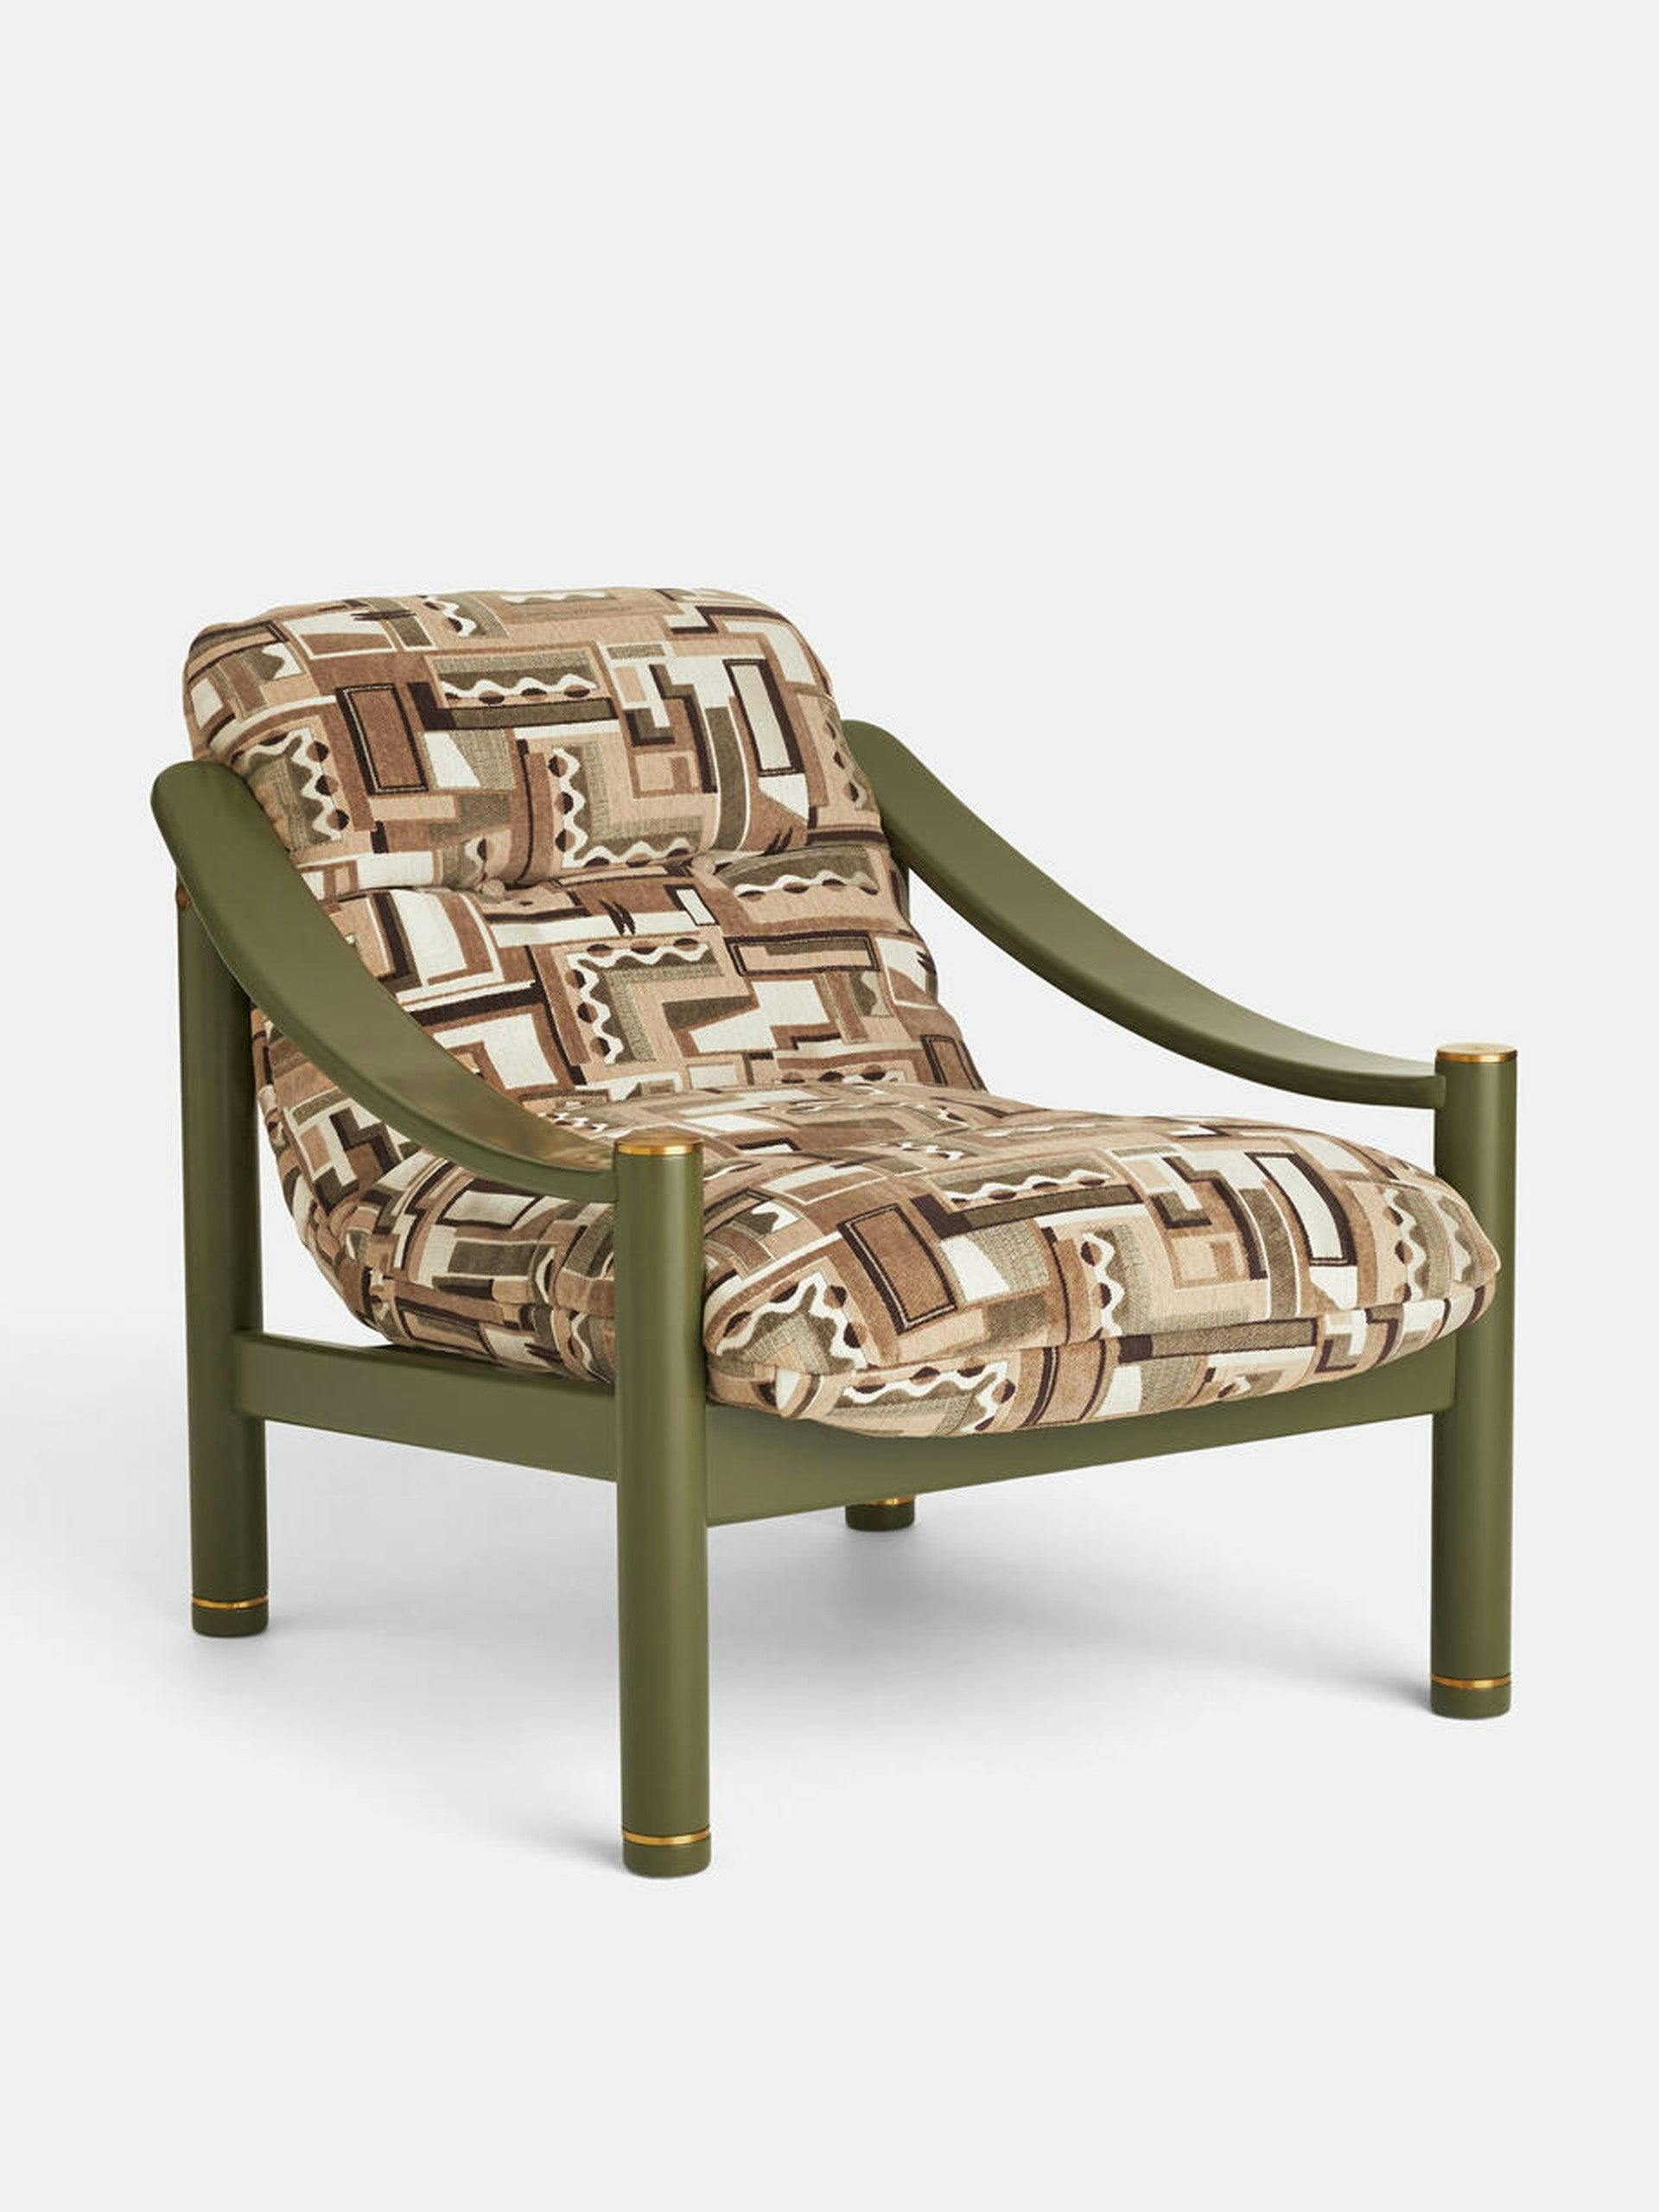 Green and brown armchair